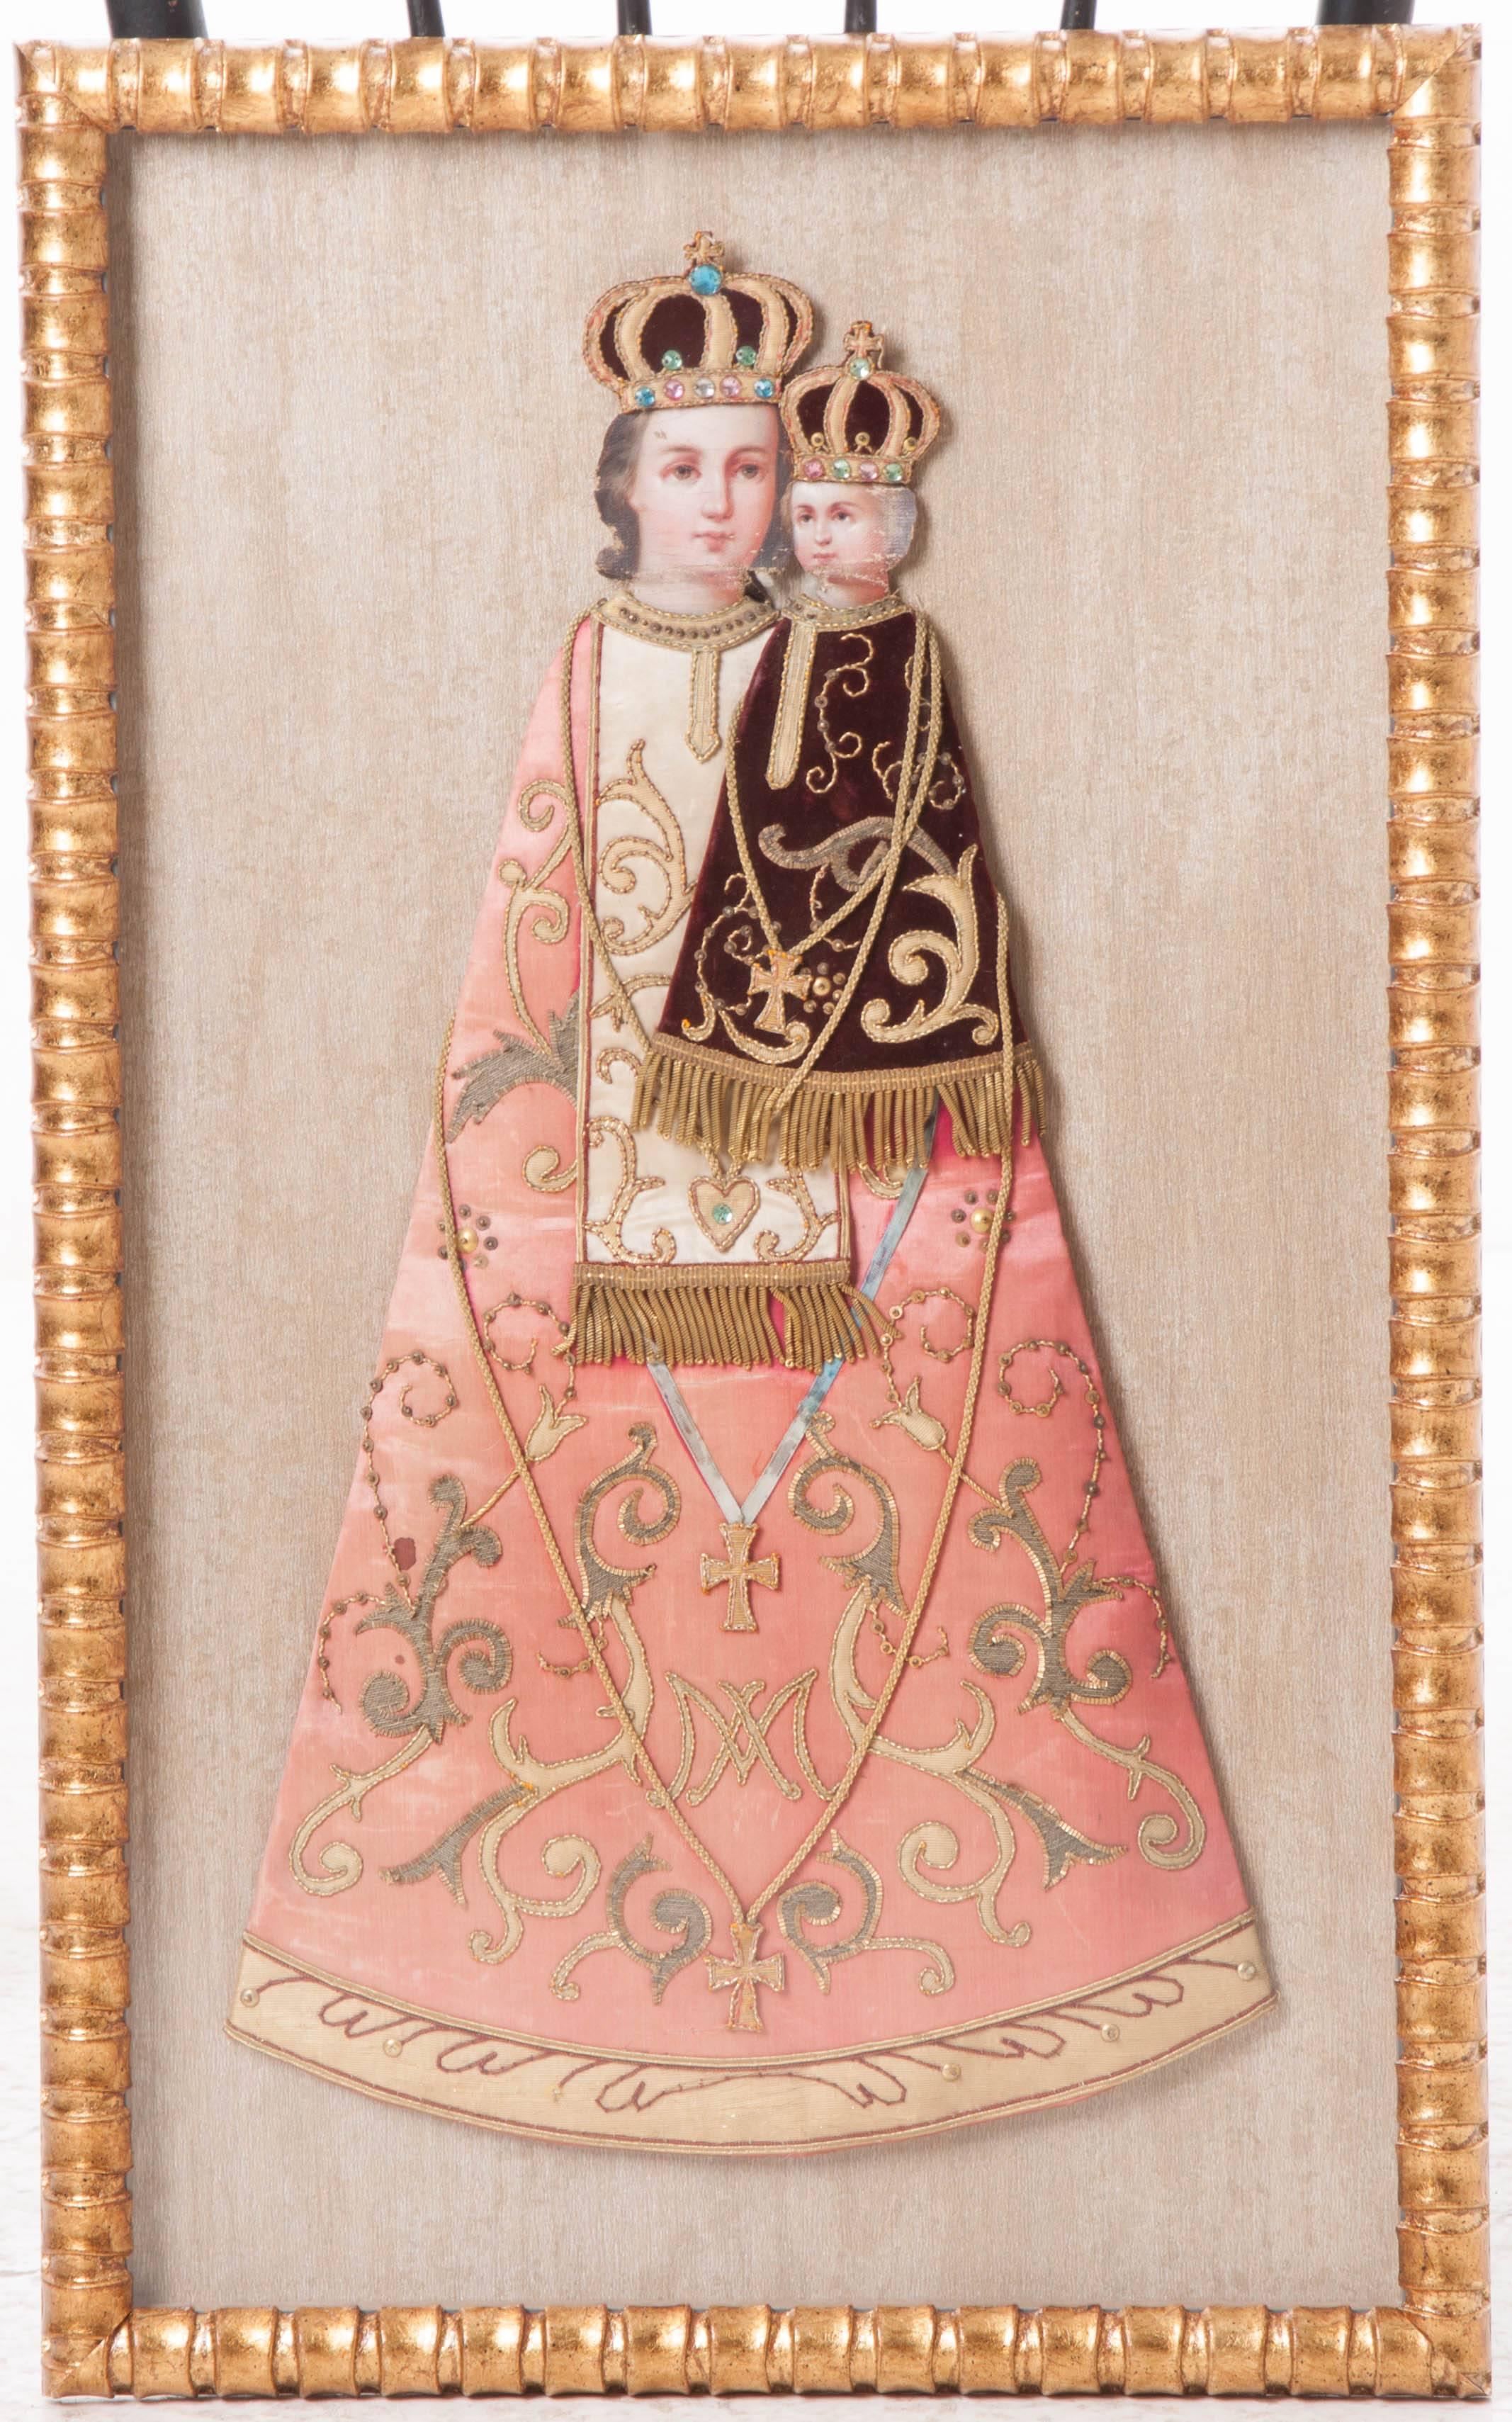 Framed antique textile, taken from a religious banner of Christ Child with Mother, Mary dressed in fine silk and velvet with raised gold metallic embroidery and cording. Set in a new gold gilt frame with metallic mat board.